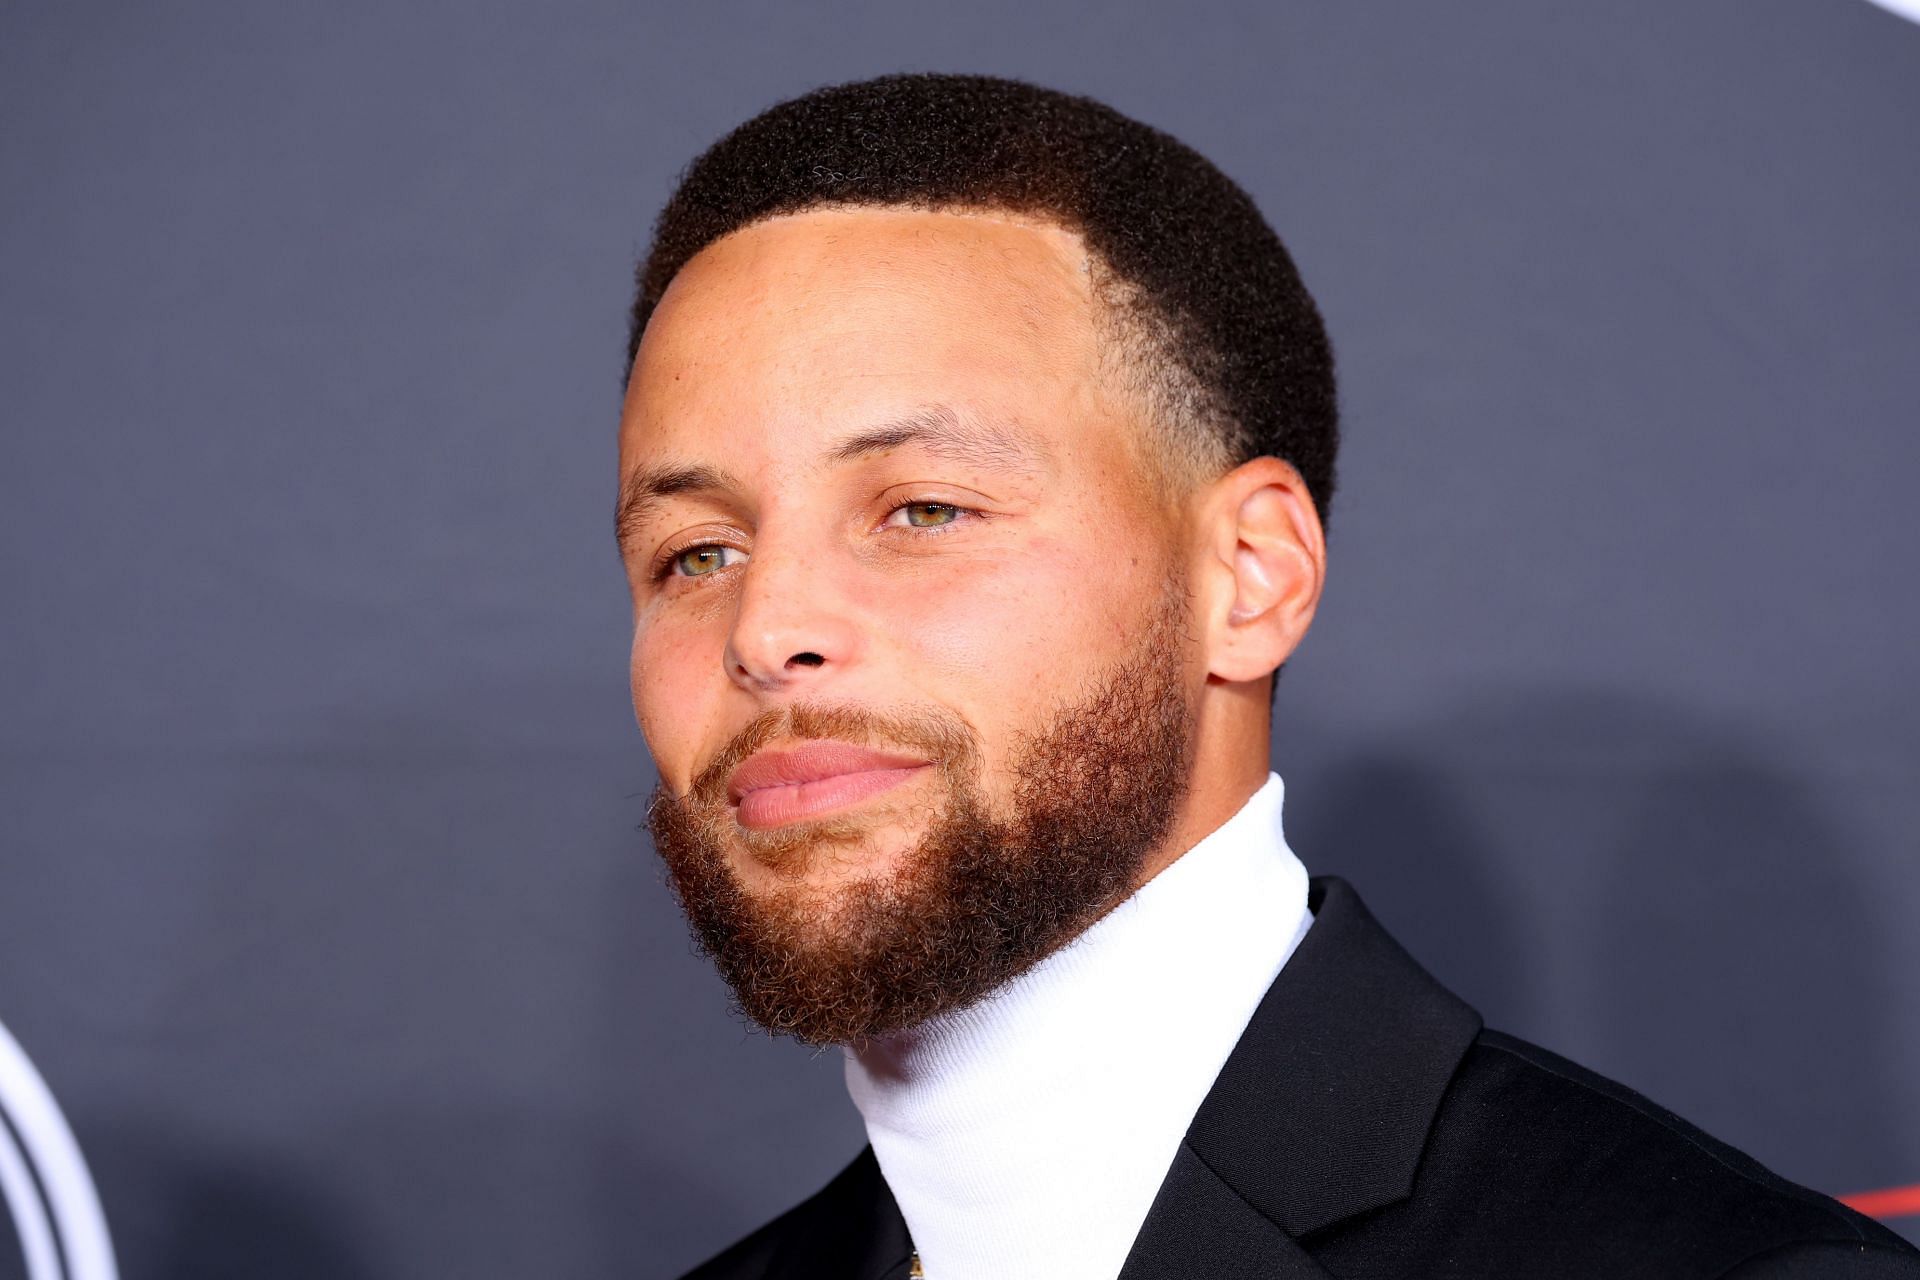 Steph Curry at the 2022 ESPYs - Arrivals